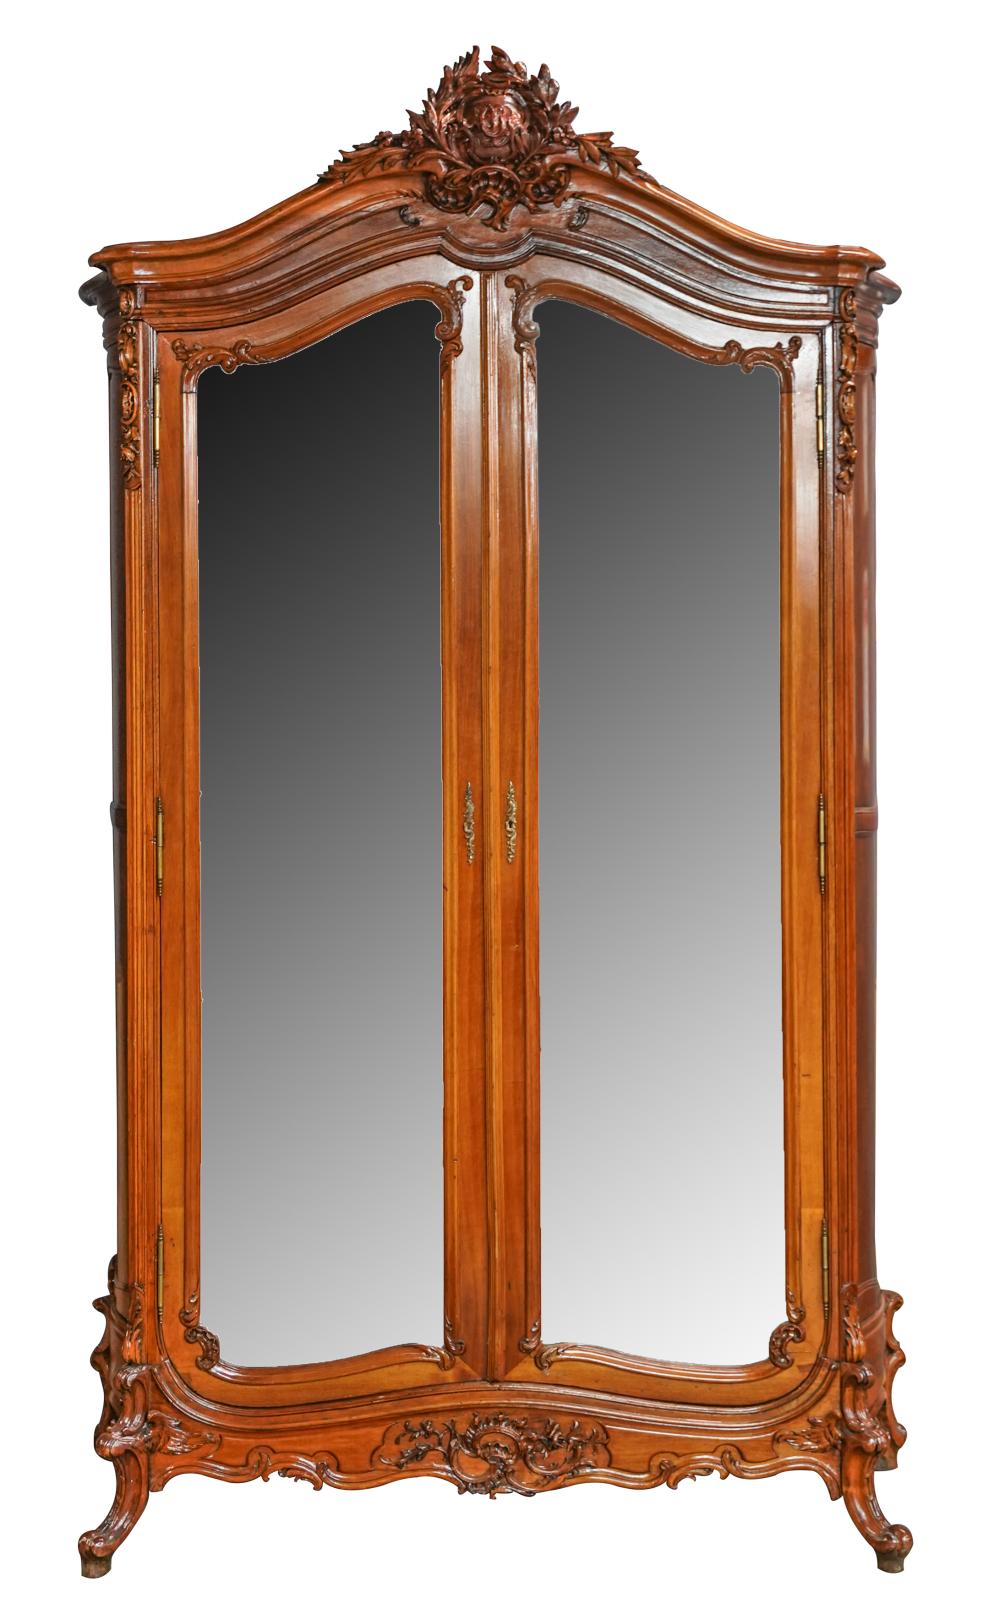 FRENCH PROVINCIAL STYLE ARMOIREthe 3272e5